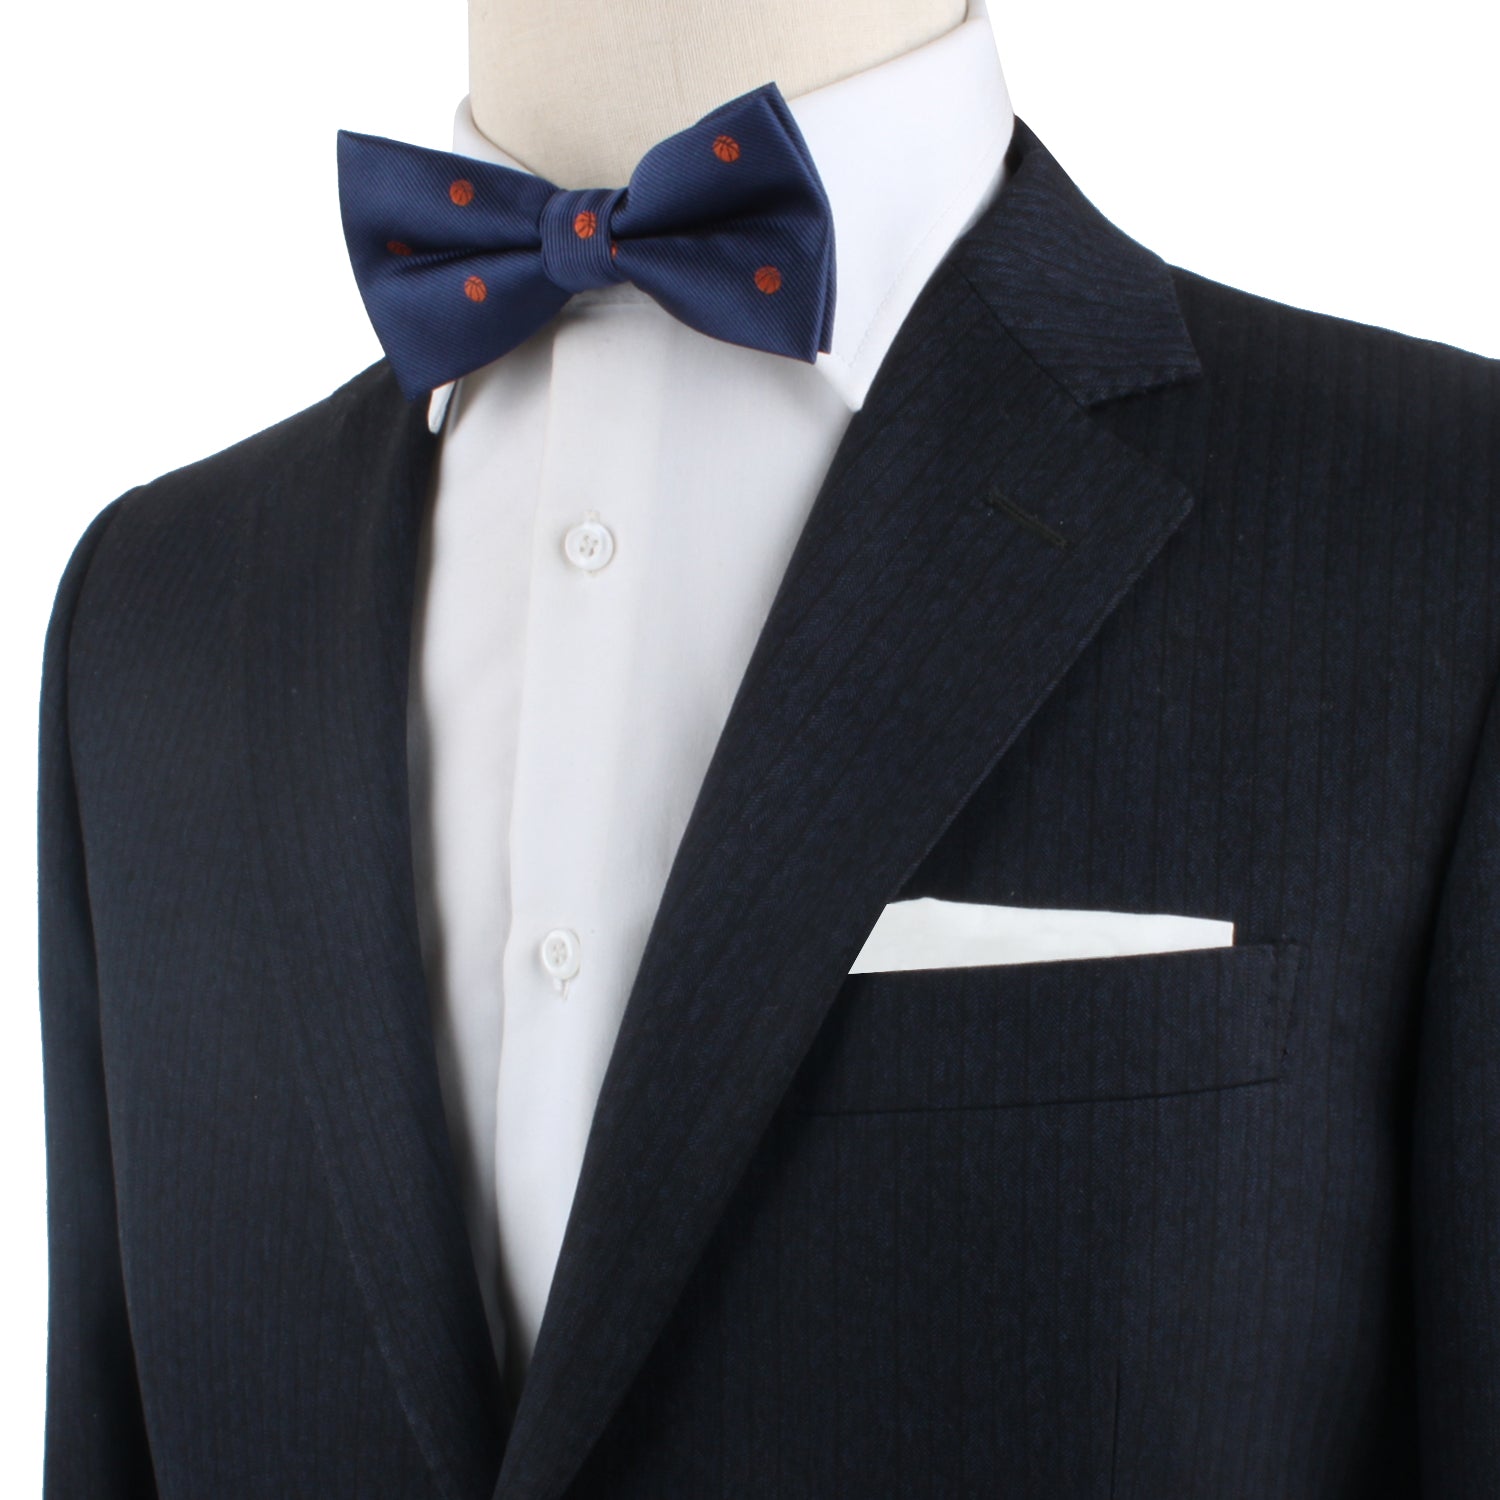 A mannequin wearing a Basketball Bow Tie and a suit, showcasing the latest fashion trends.